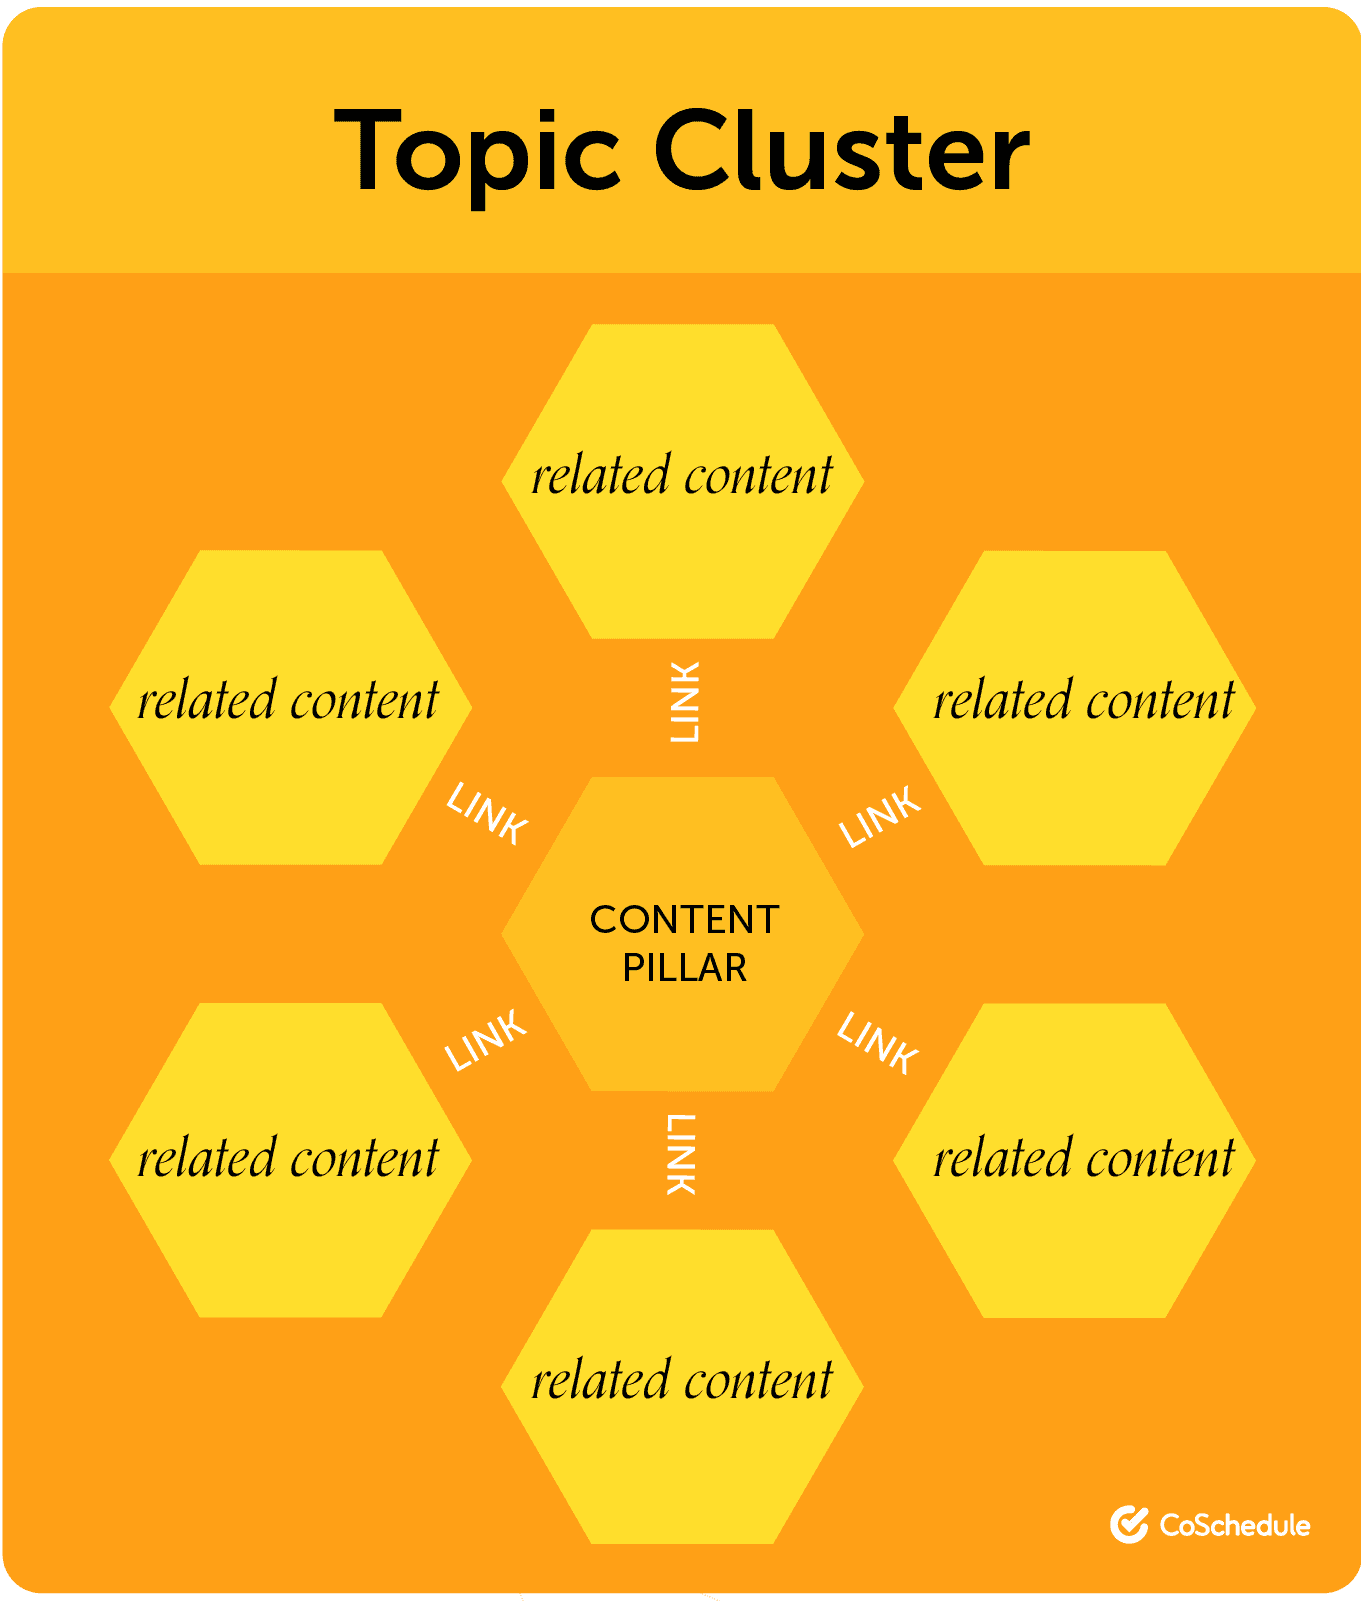 Topic cluster by CoSchedule that has content pillar in the middle that links to all types of related content.